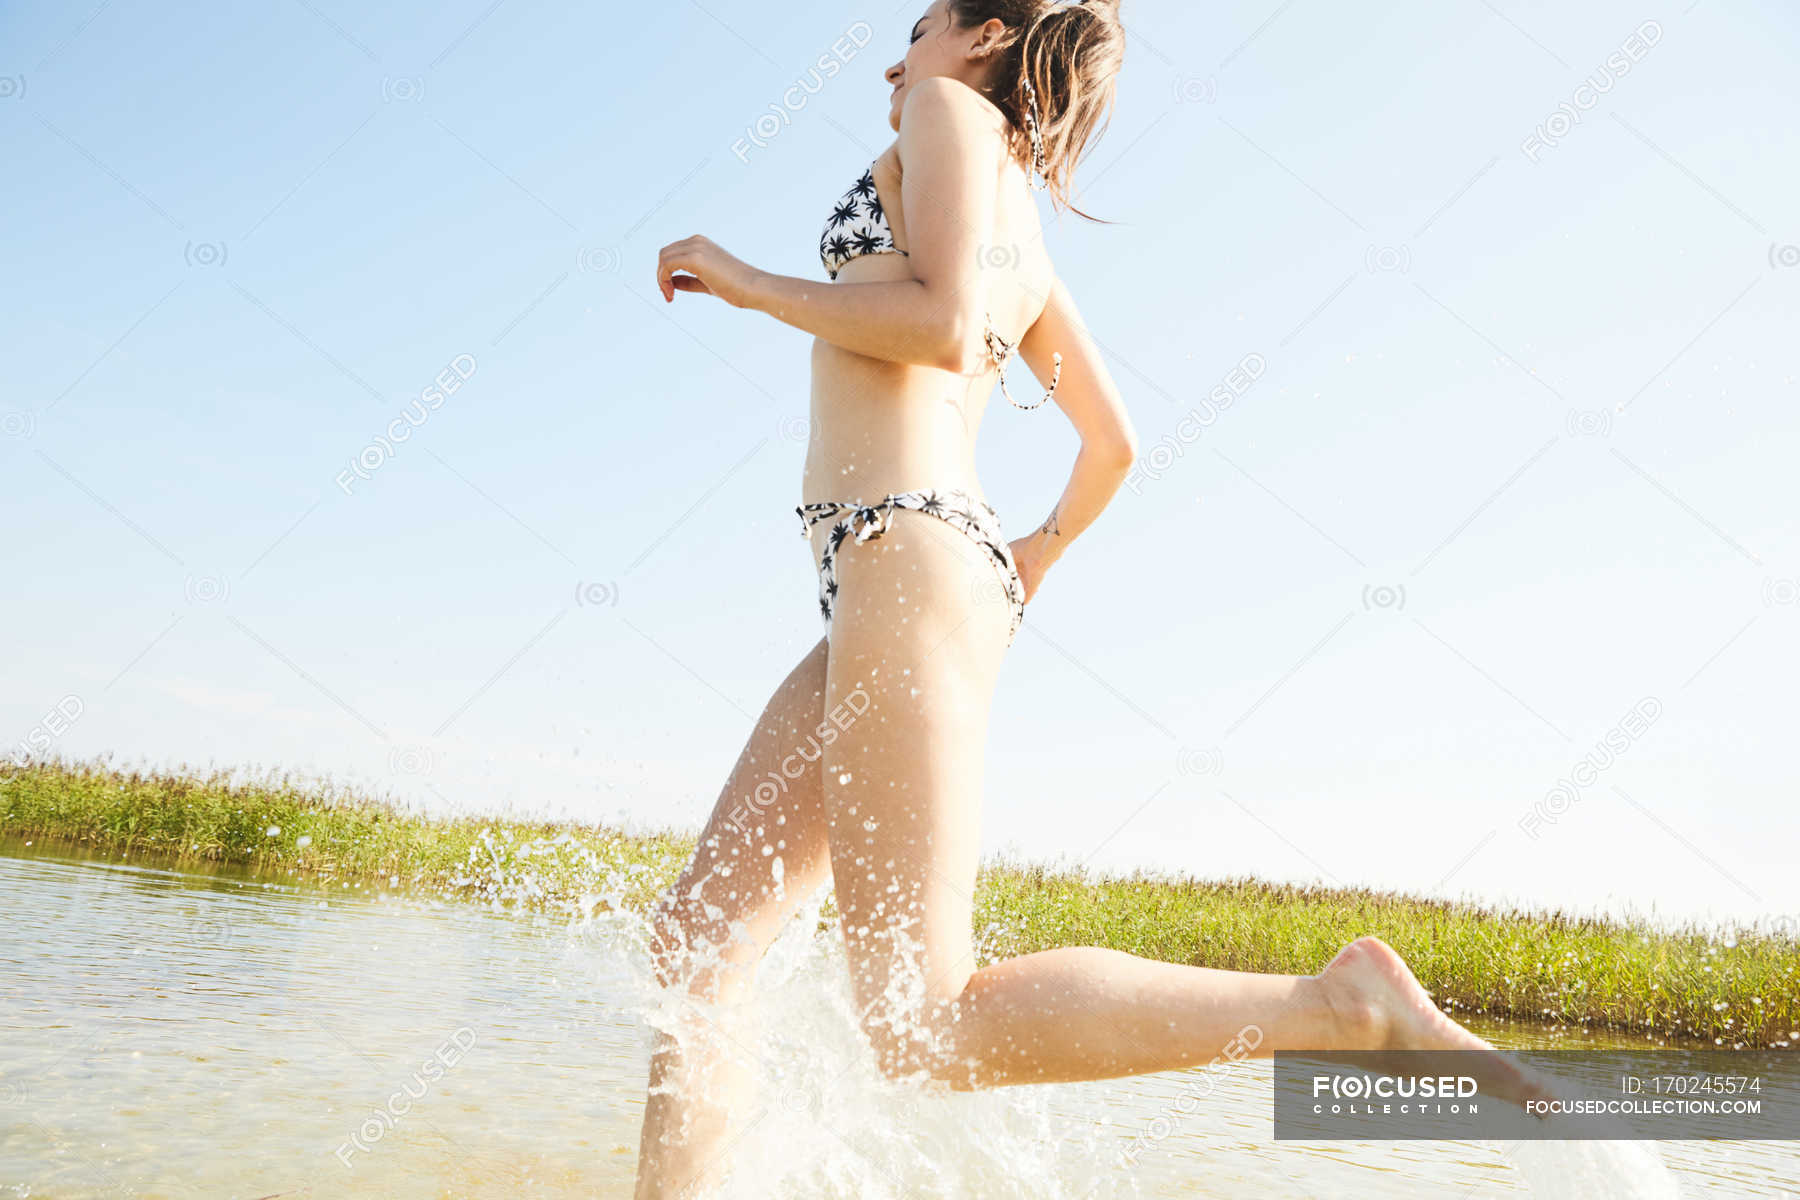 Woman In Swimsuit Running In Water Side View Joy Stock Photo